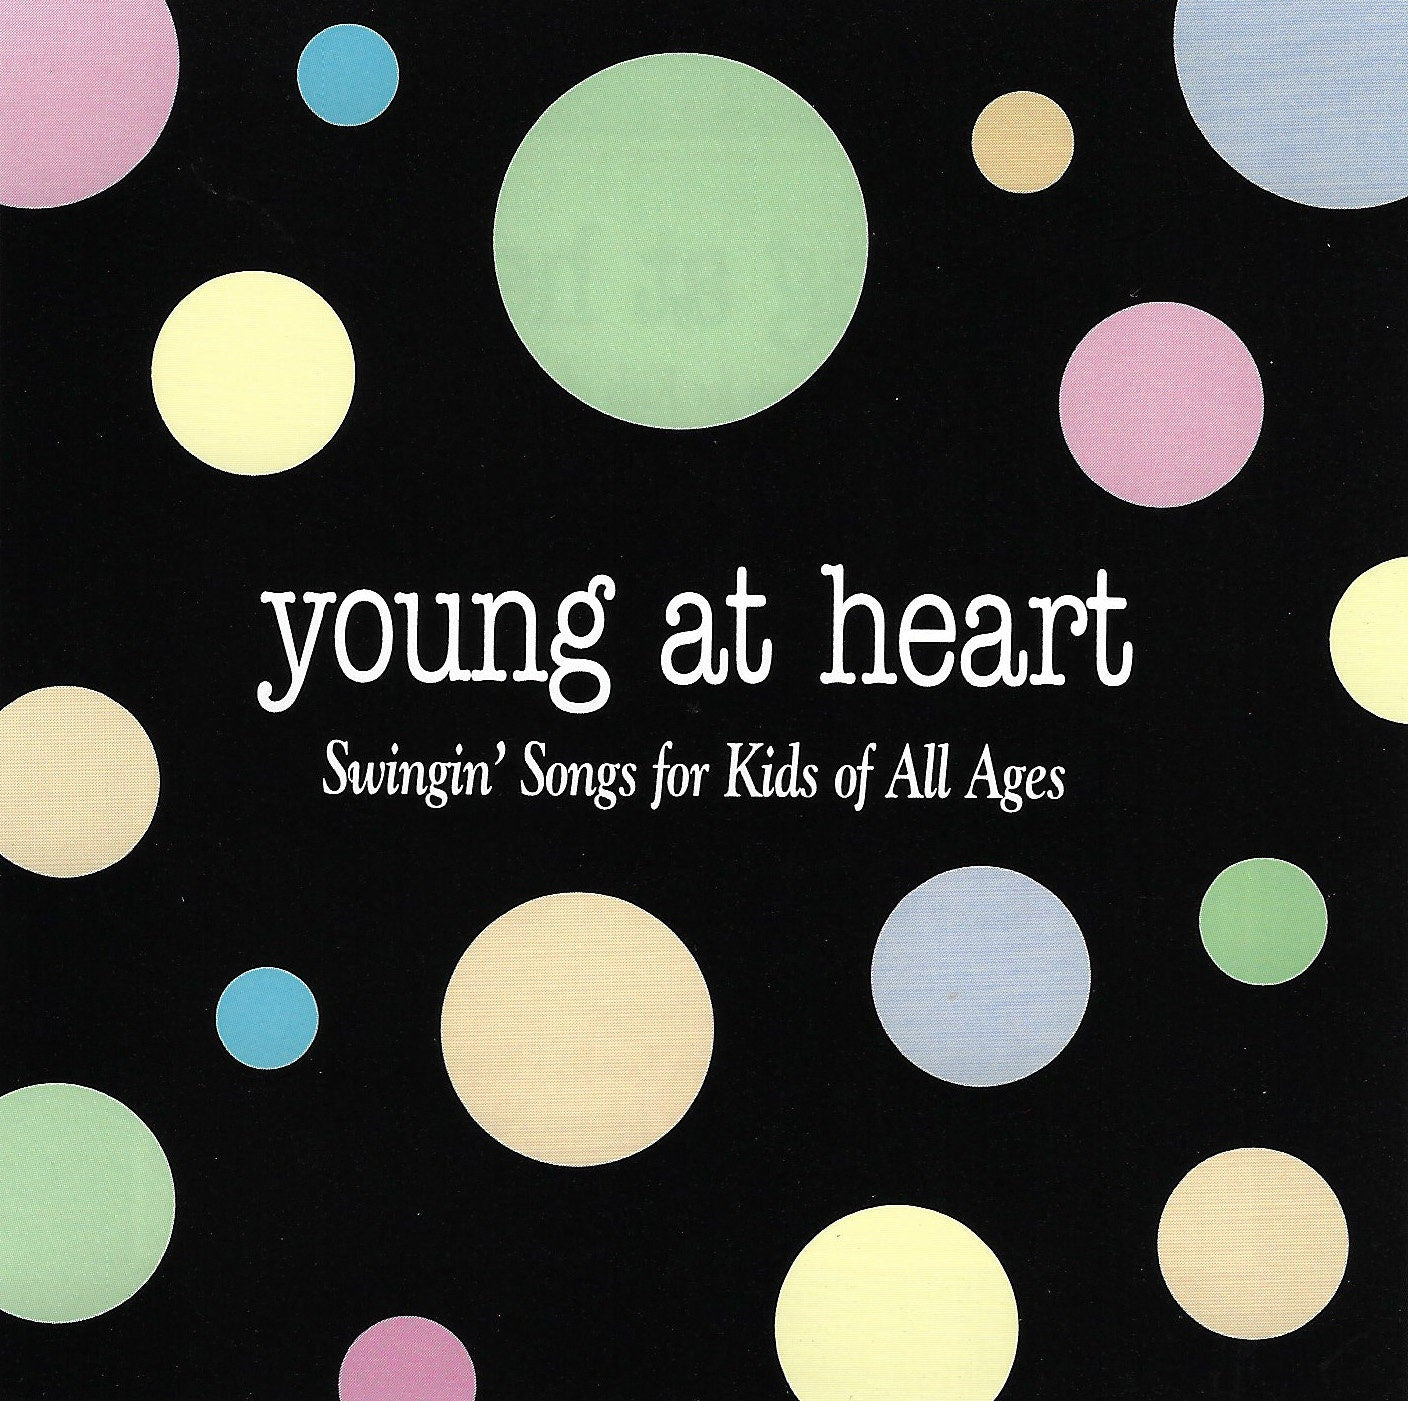 Eddie Angel "Young at Heart" CD